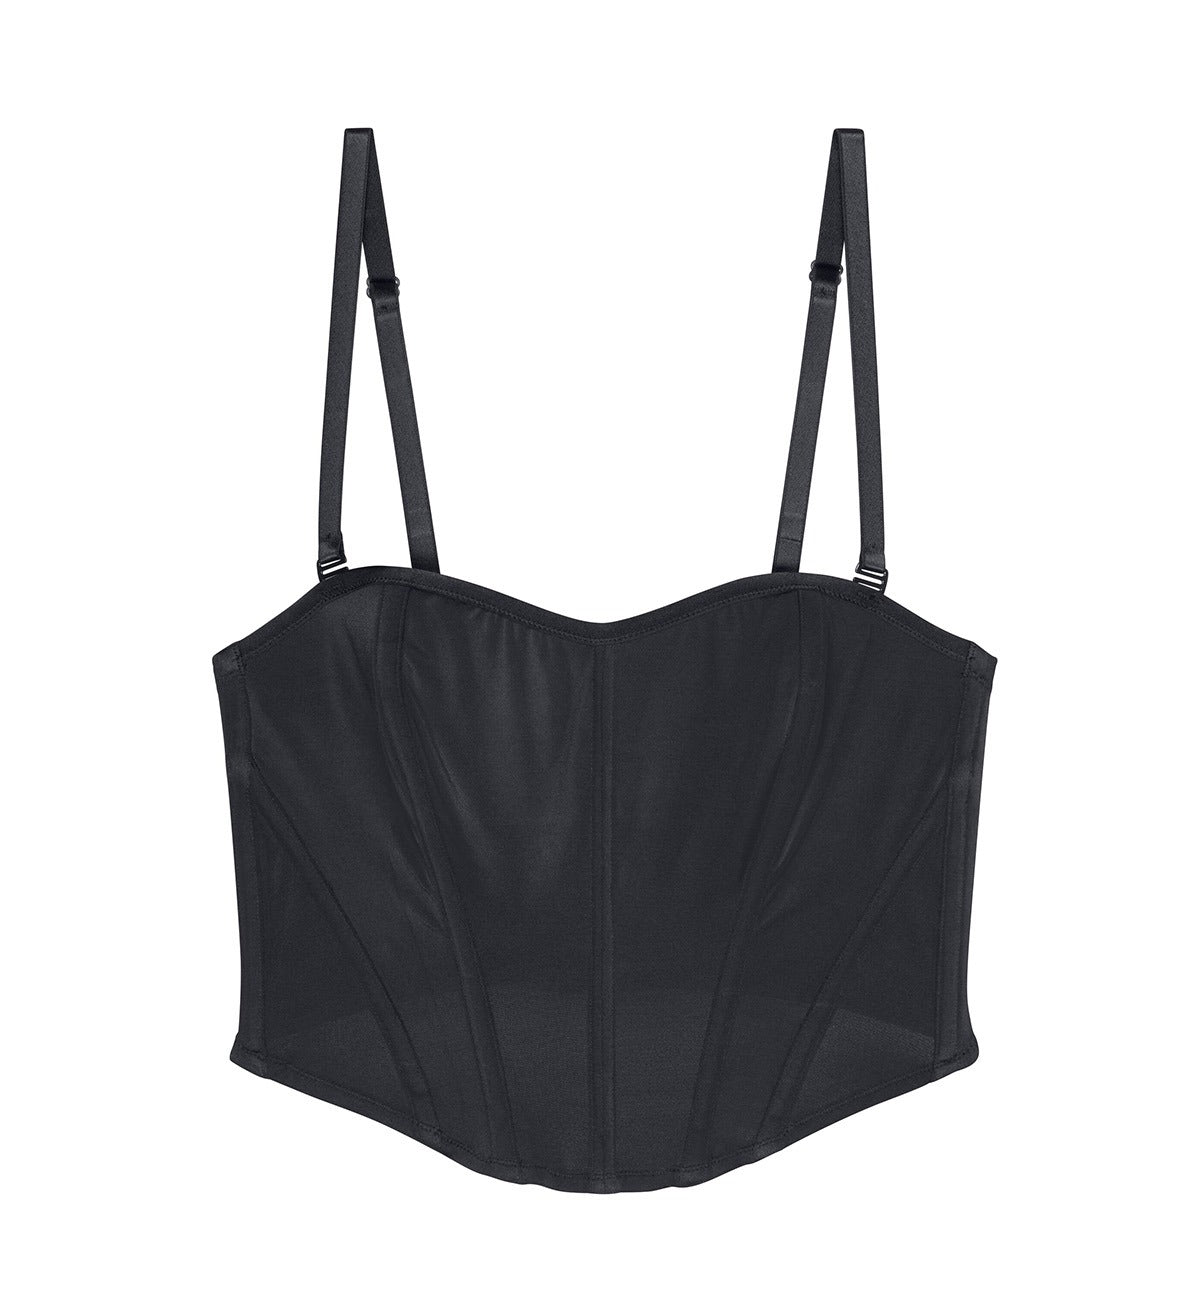 Sparkling Fringed Black Corset Bra Top For Womens Carnival Club Hottie With  Tight Fishbone Halter From Goodgoods12345, $16.29